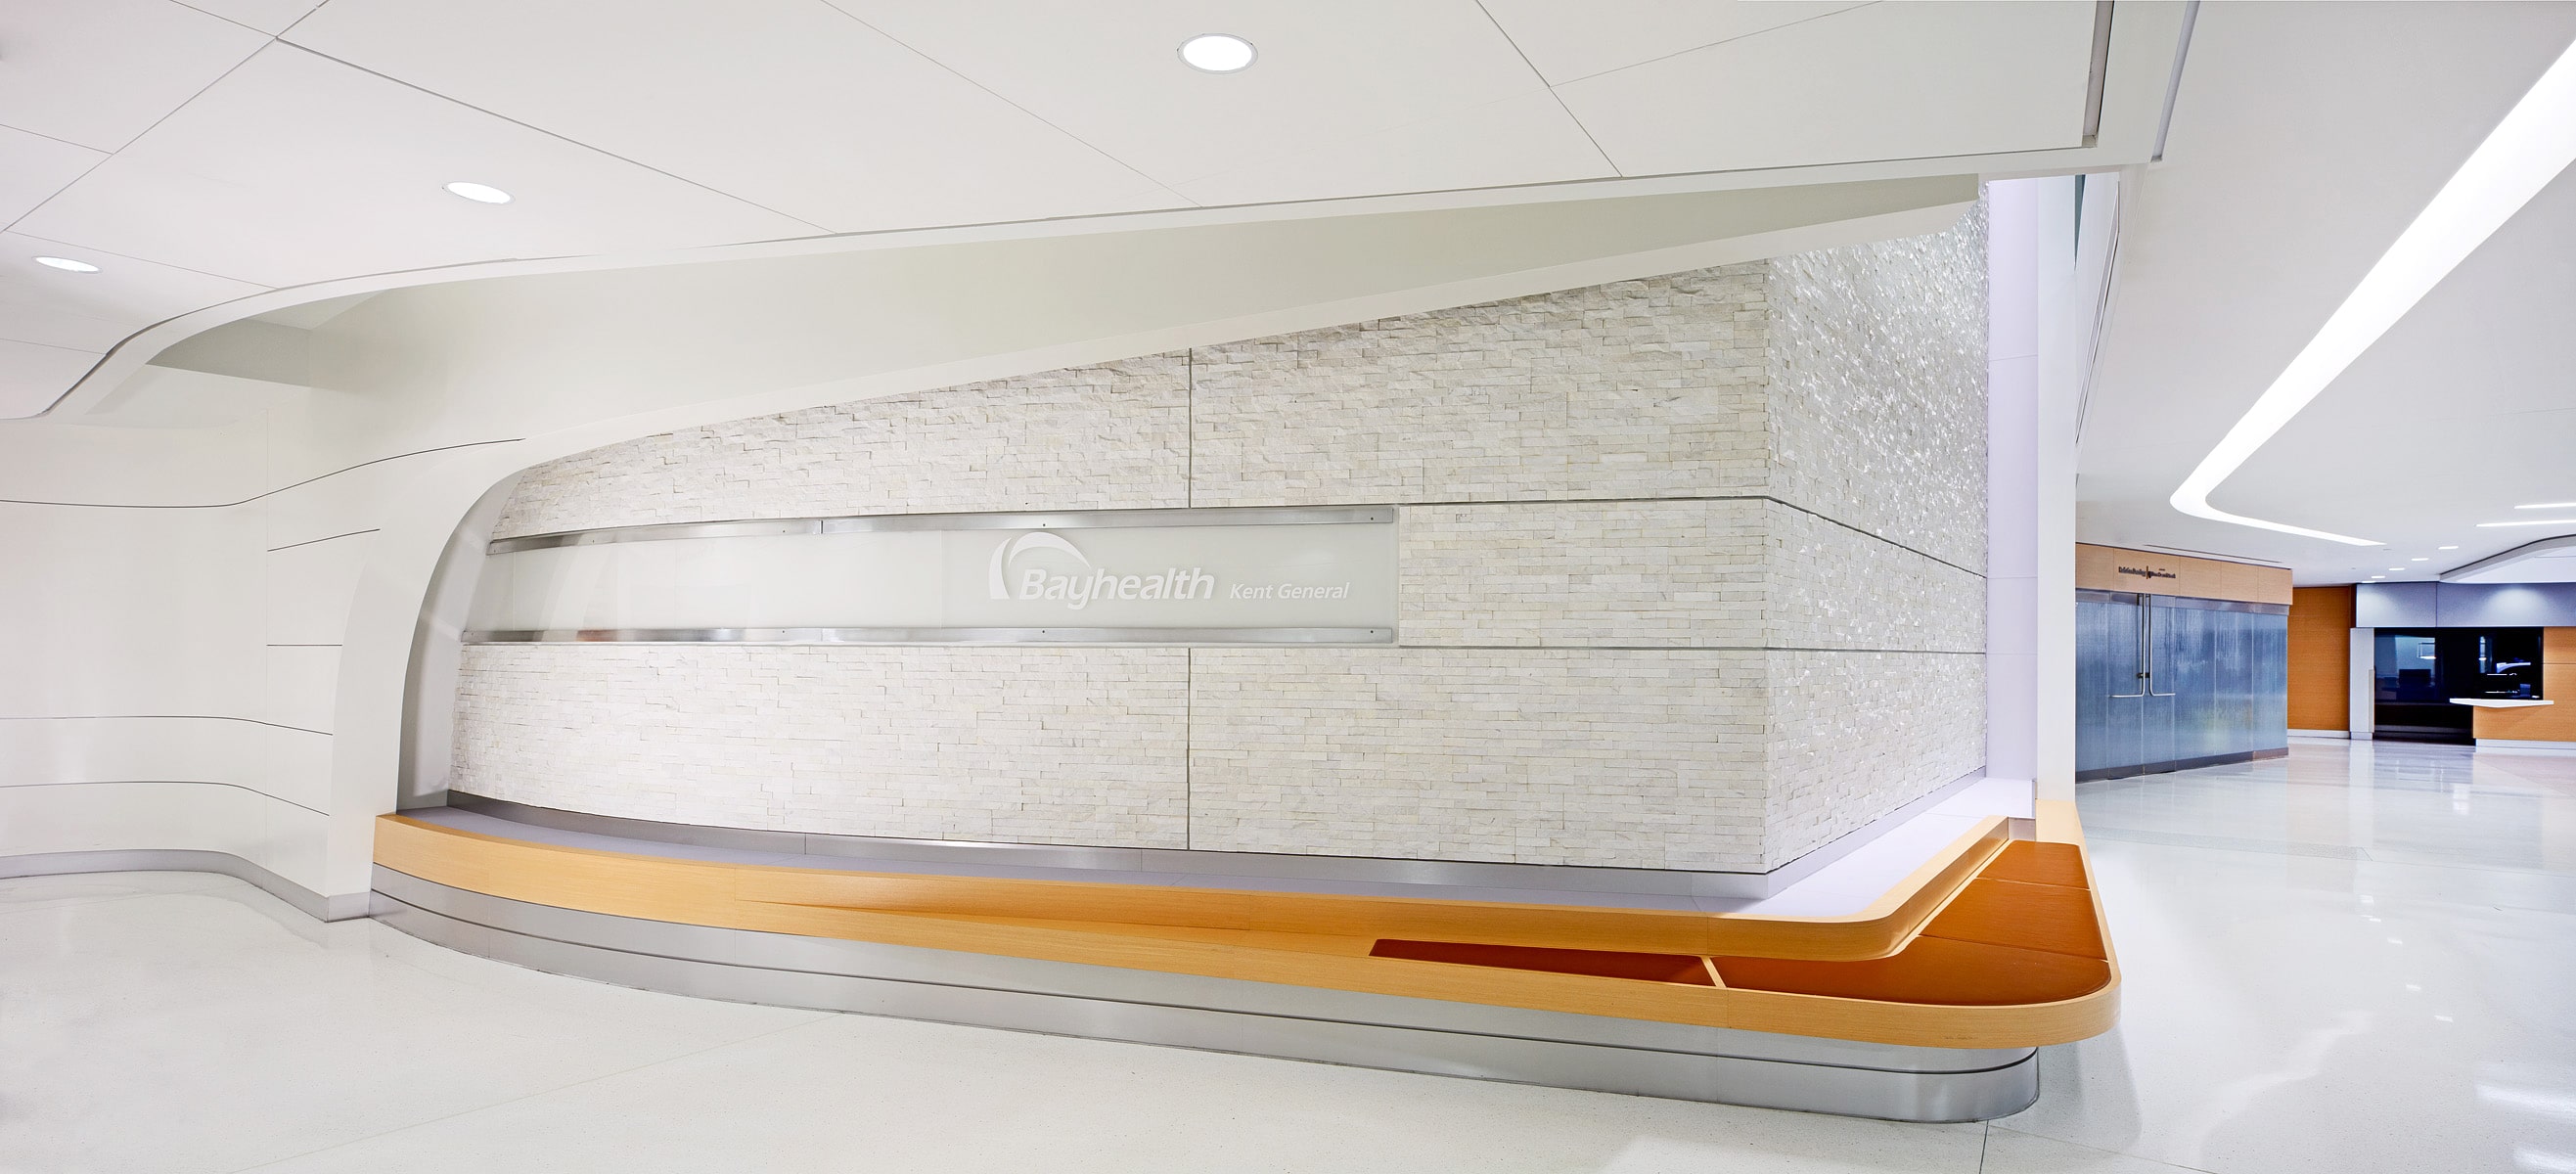 Norstone White Rock Panels on large feature wall at hospital with curved walls and benches